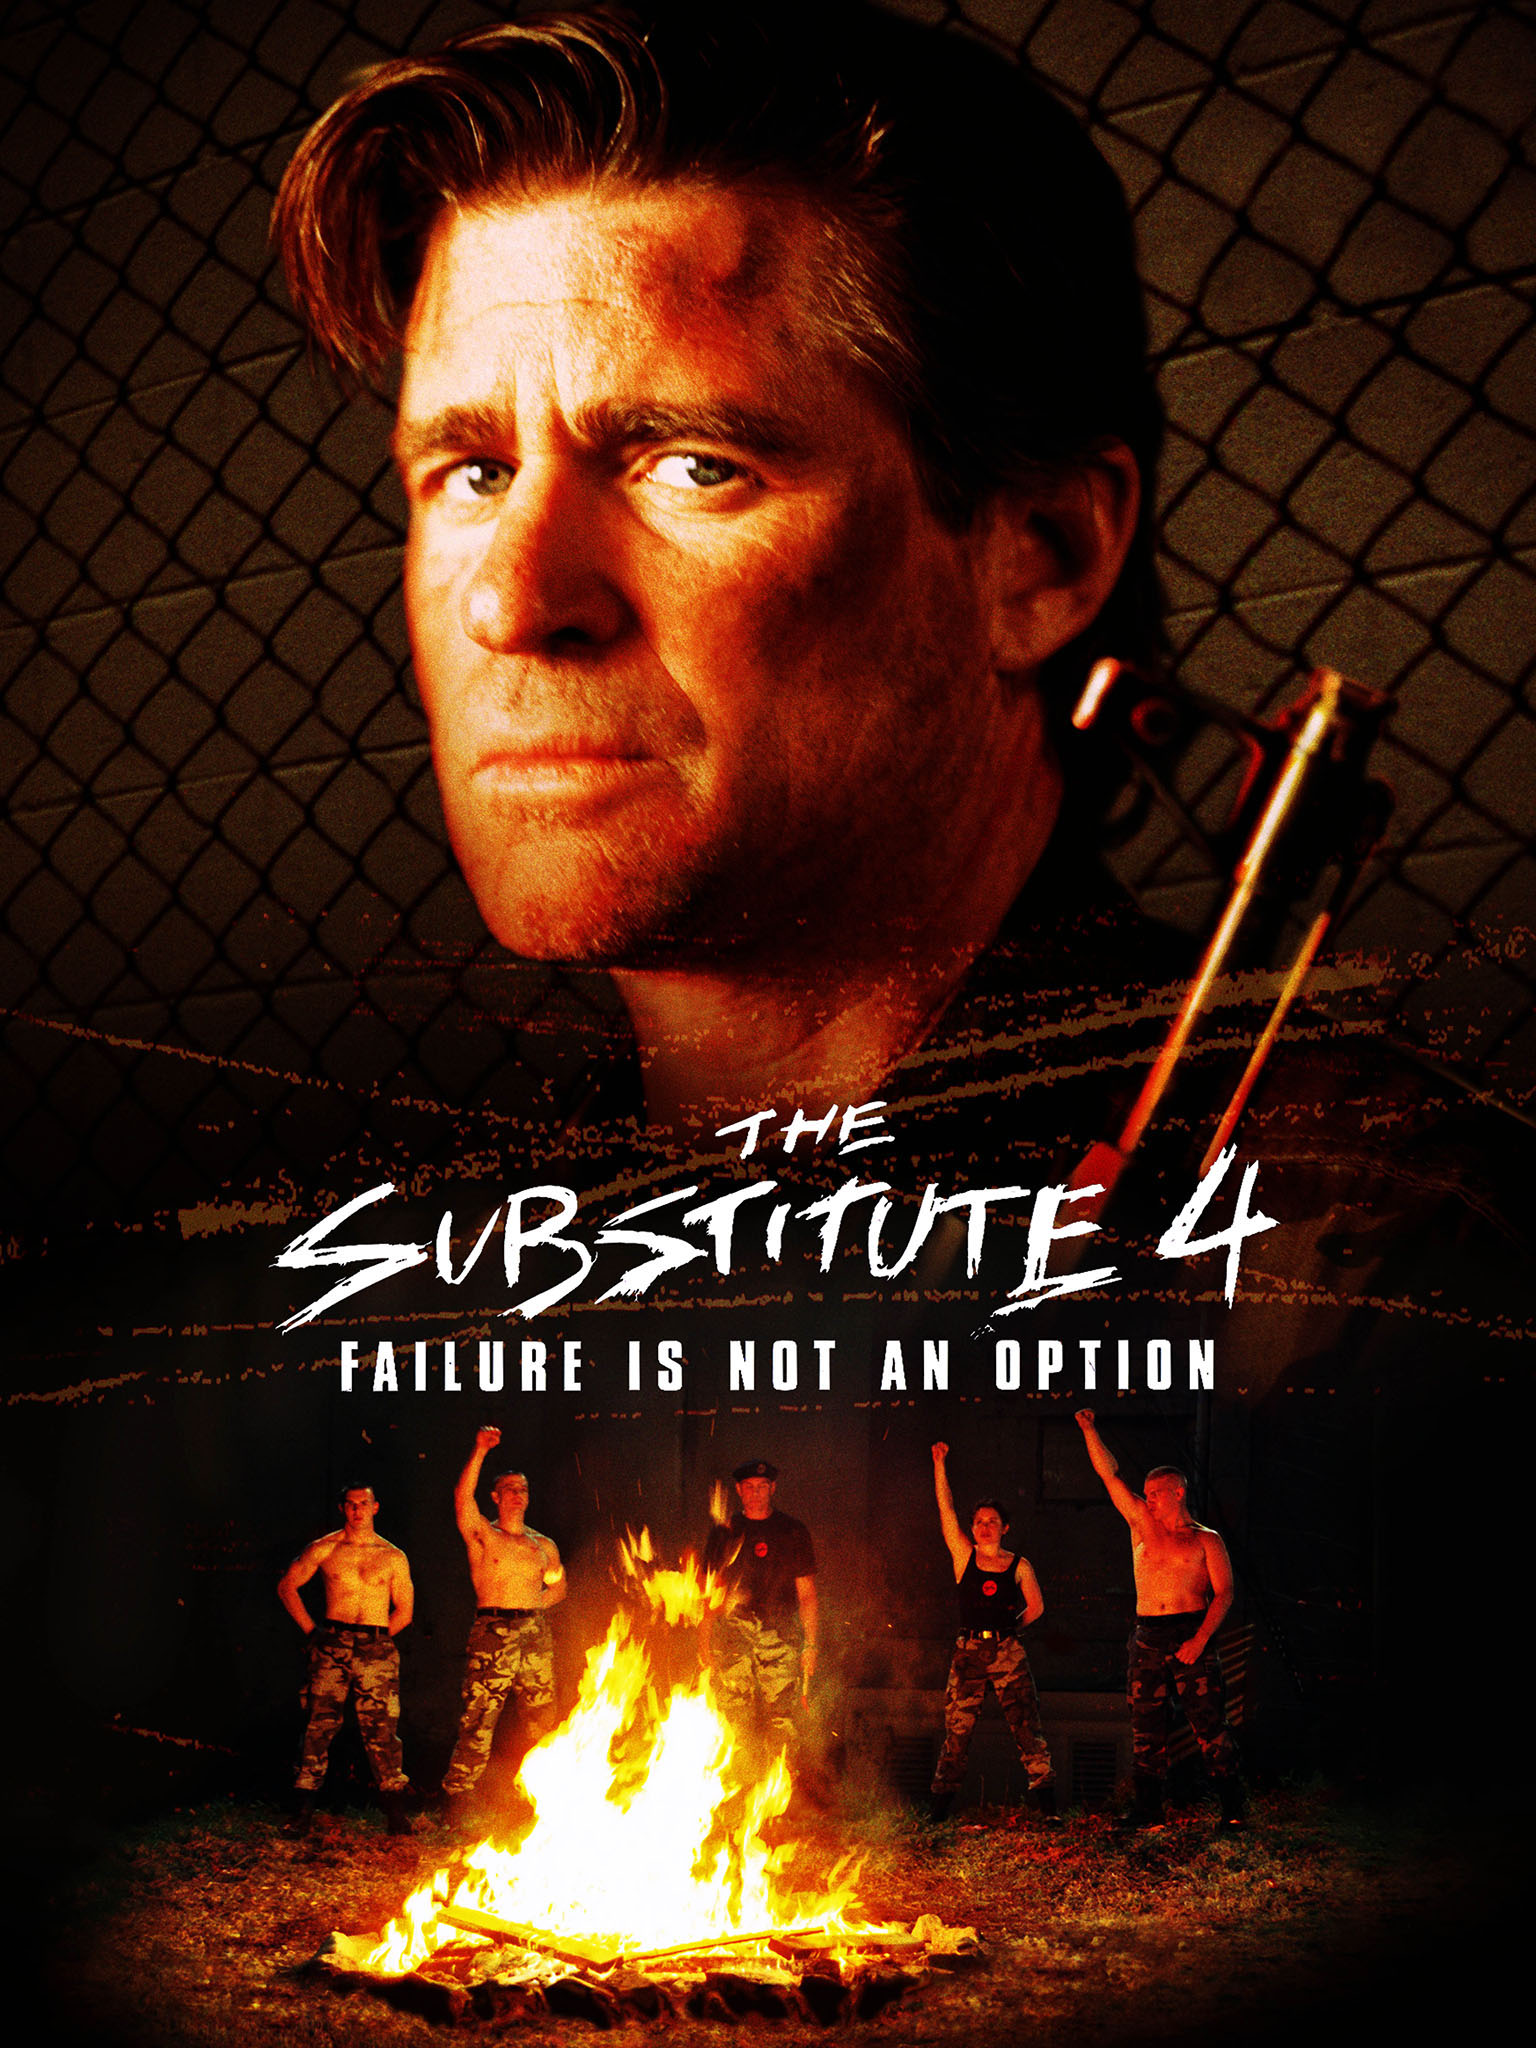 The Substitute: Failure Is Not an Option (2001) starring Treat Williams on DVD on DVD